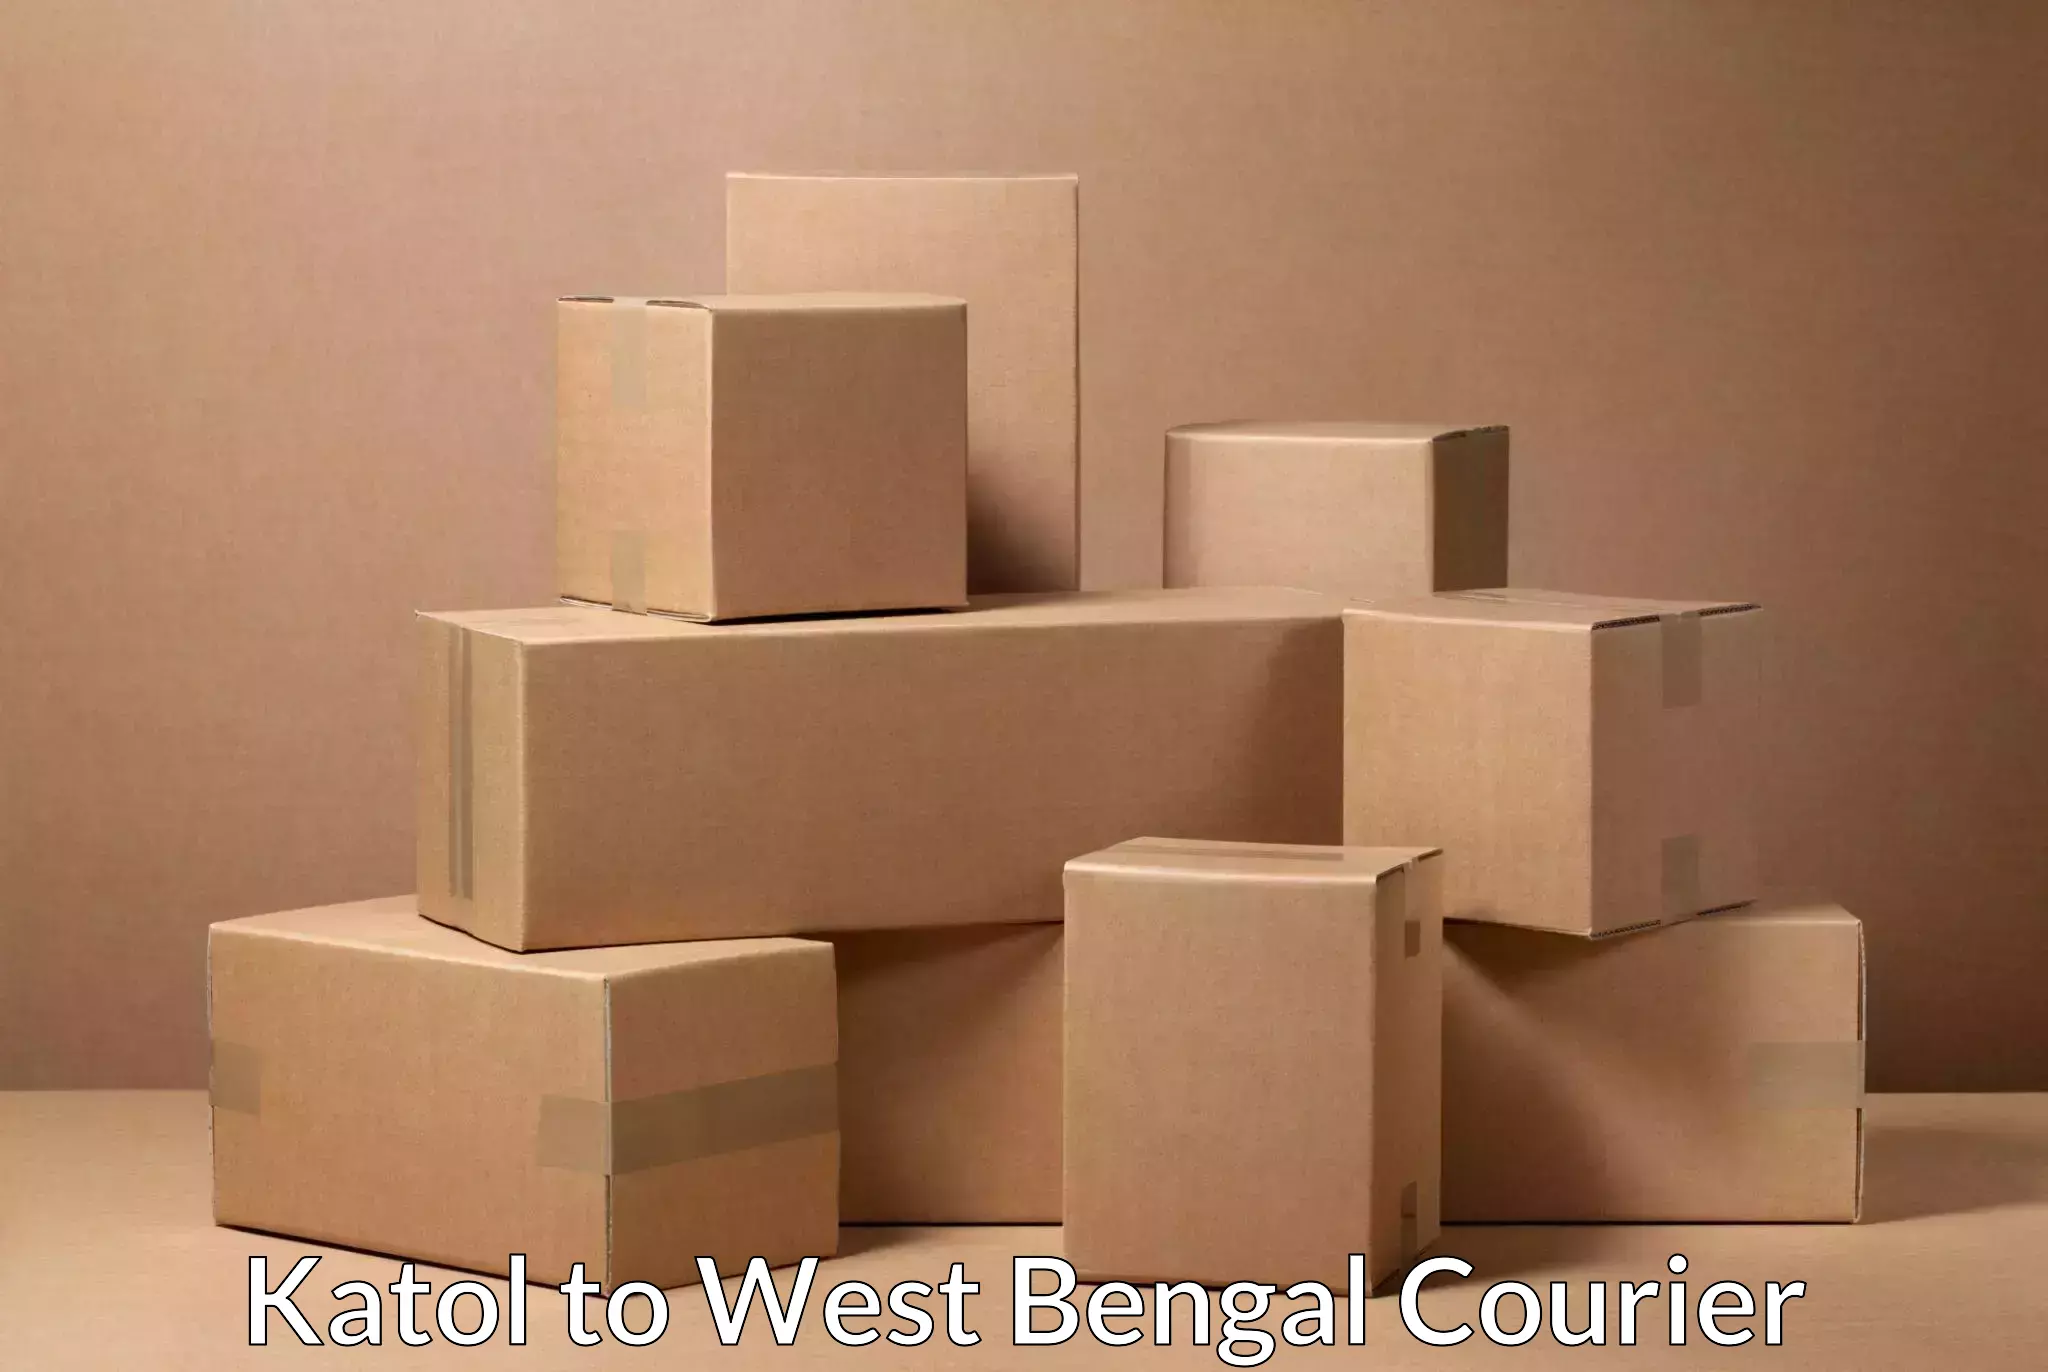 Doorstep delivery service in Katol to West Bengal